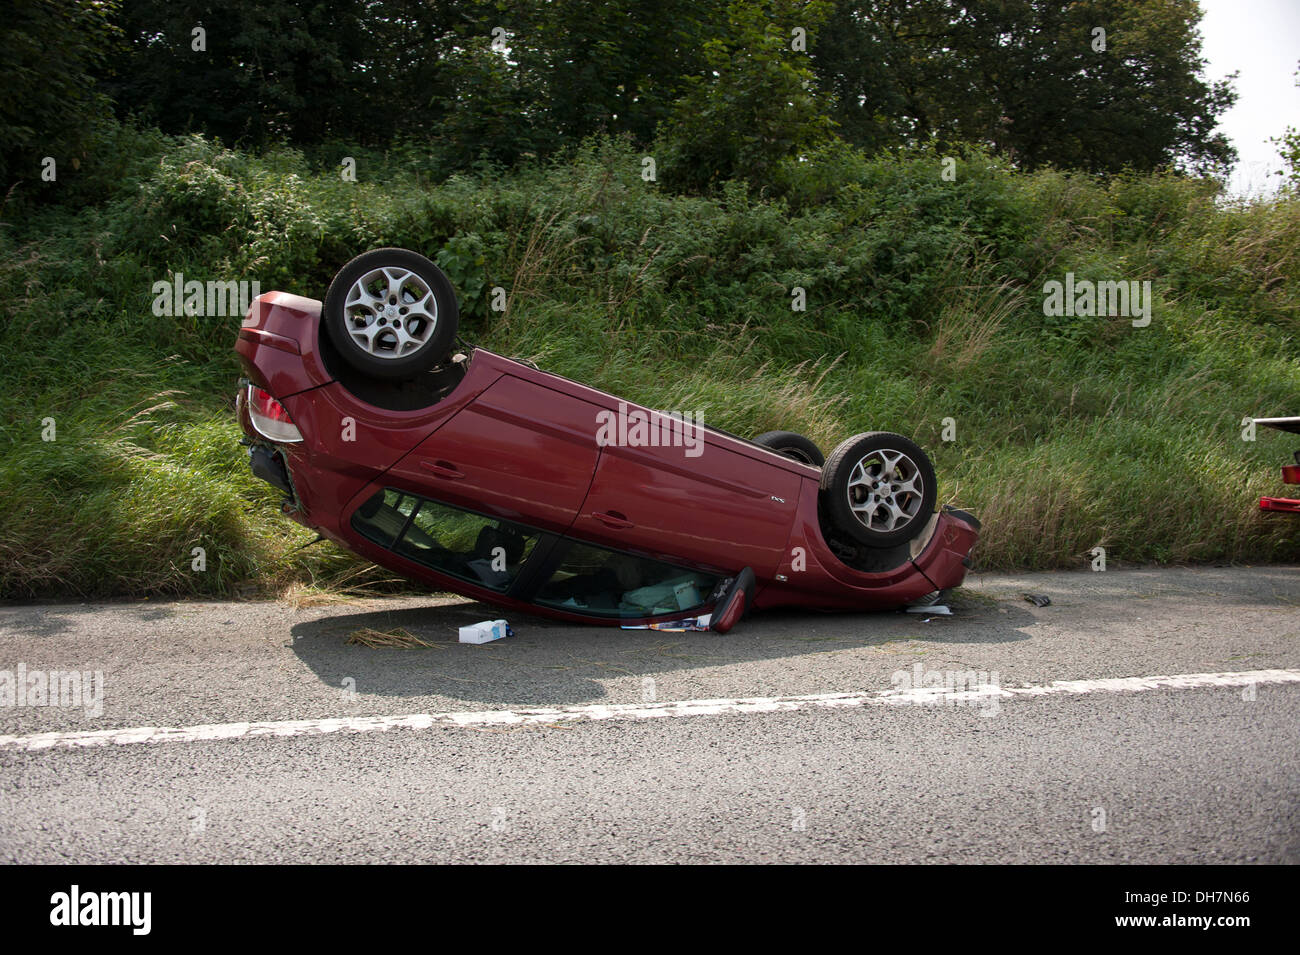 Crashed car upside down on roof RTA RTC Stock Photo